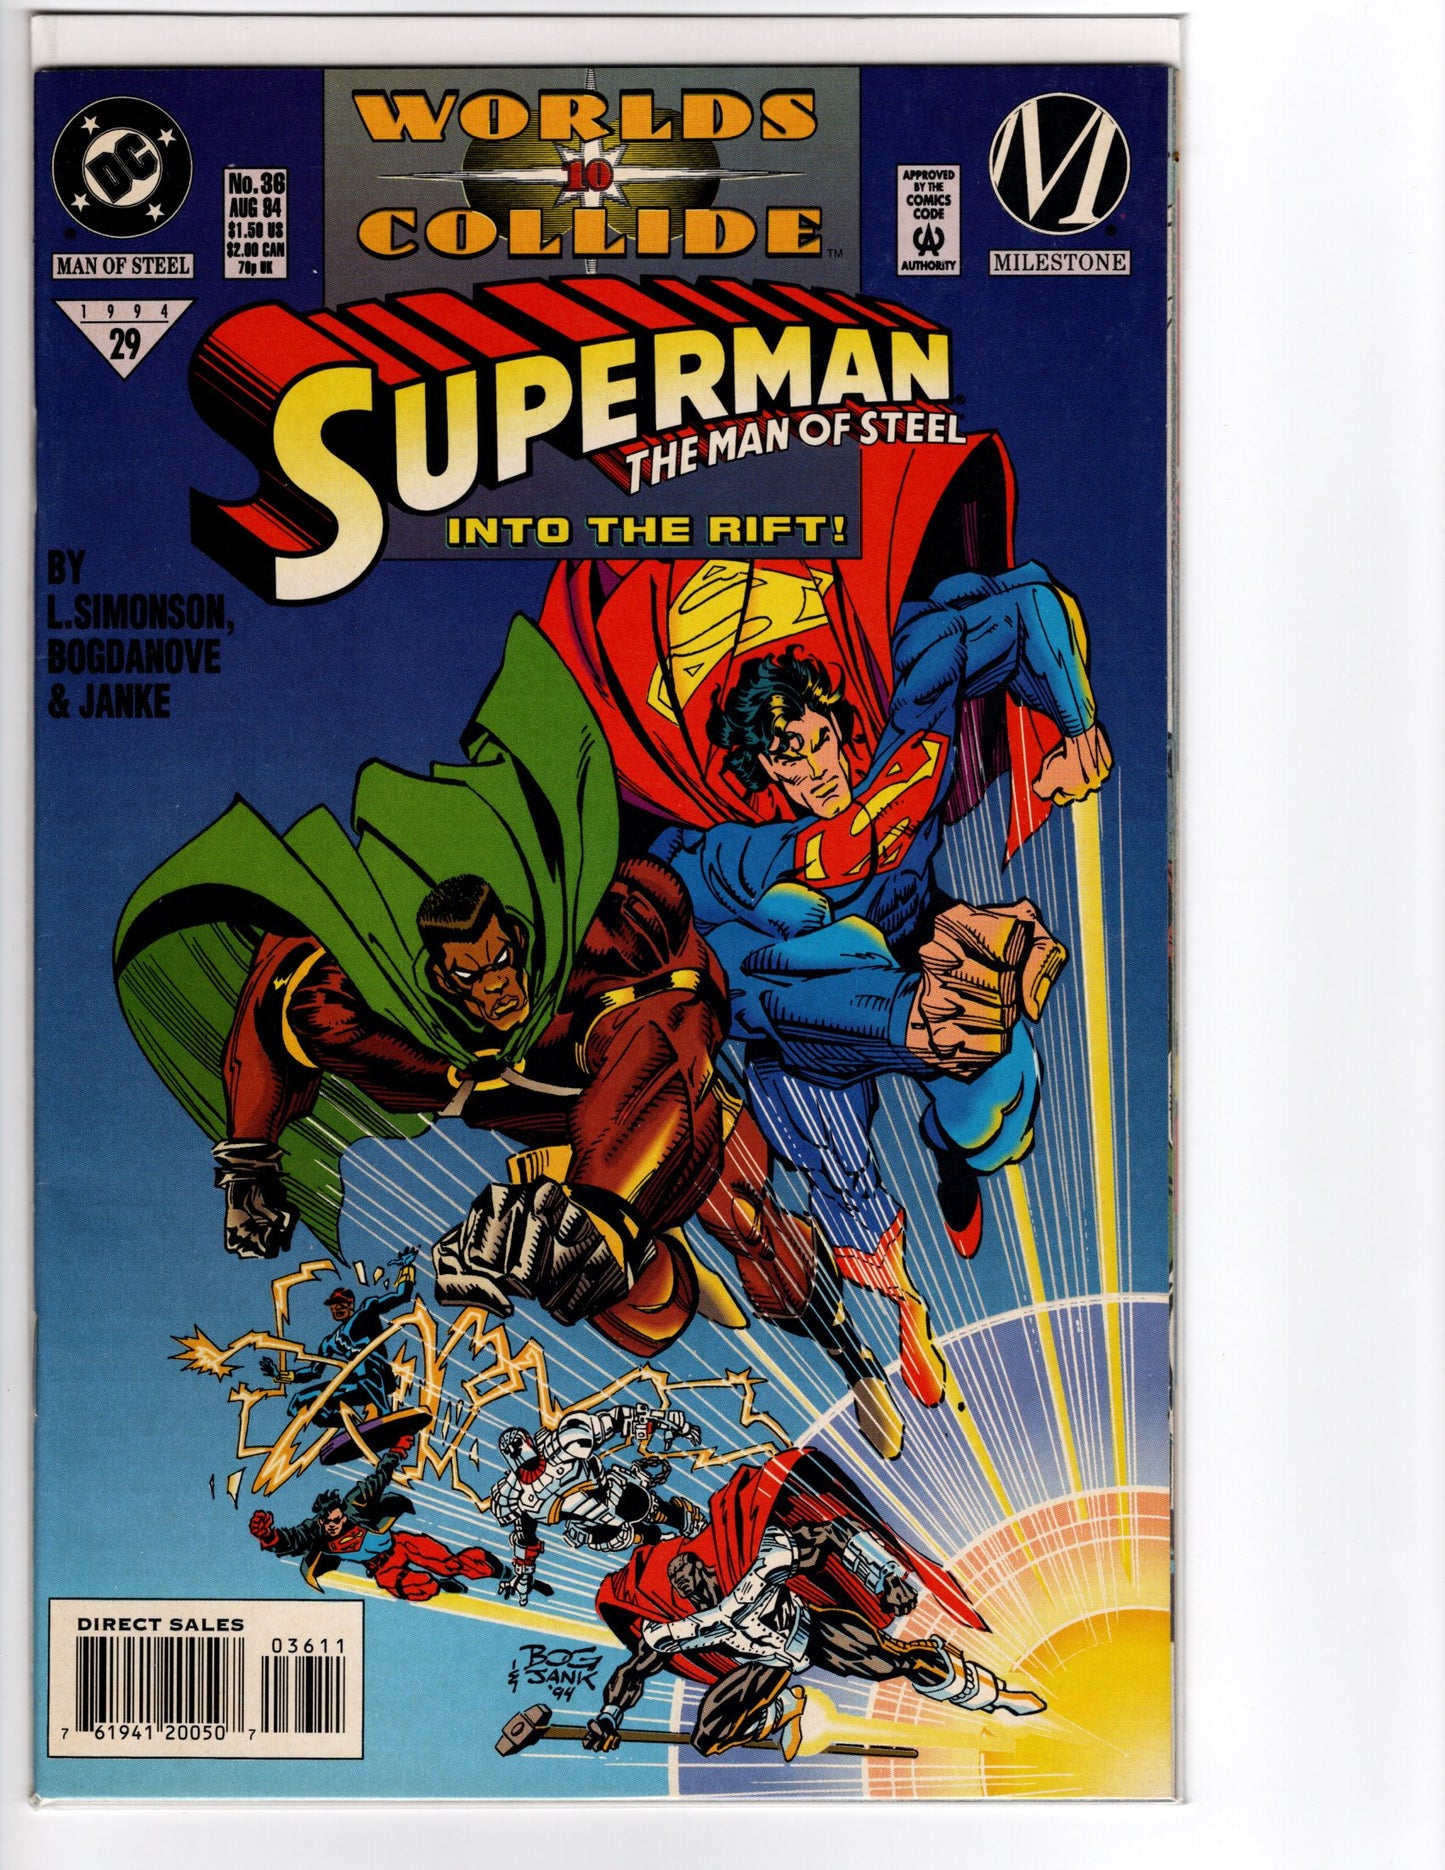 Superman - The Man of Steel No. 36